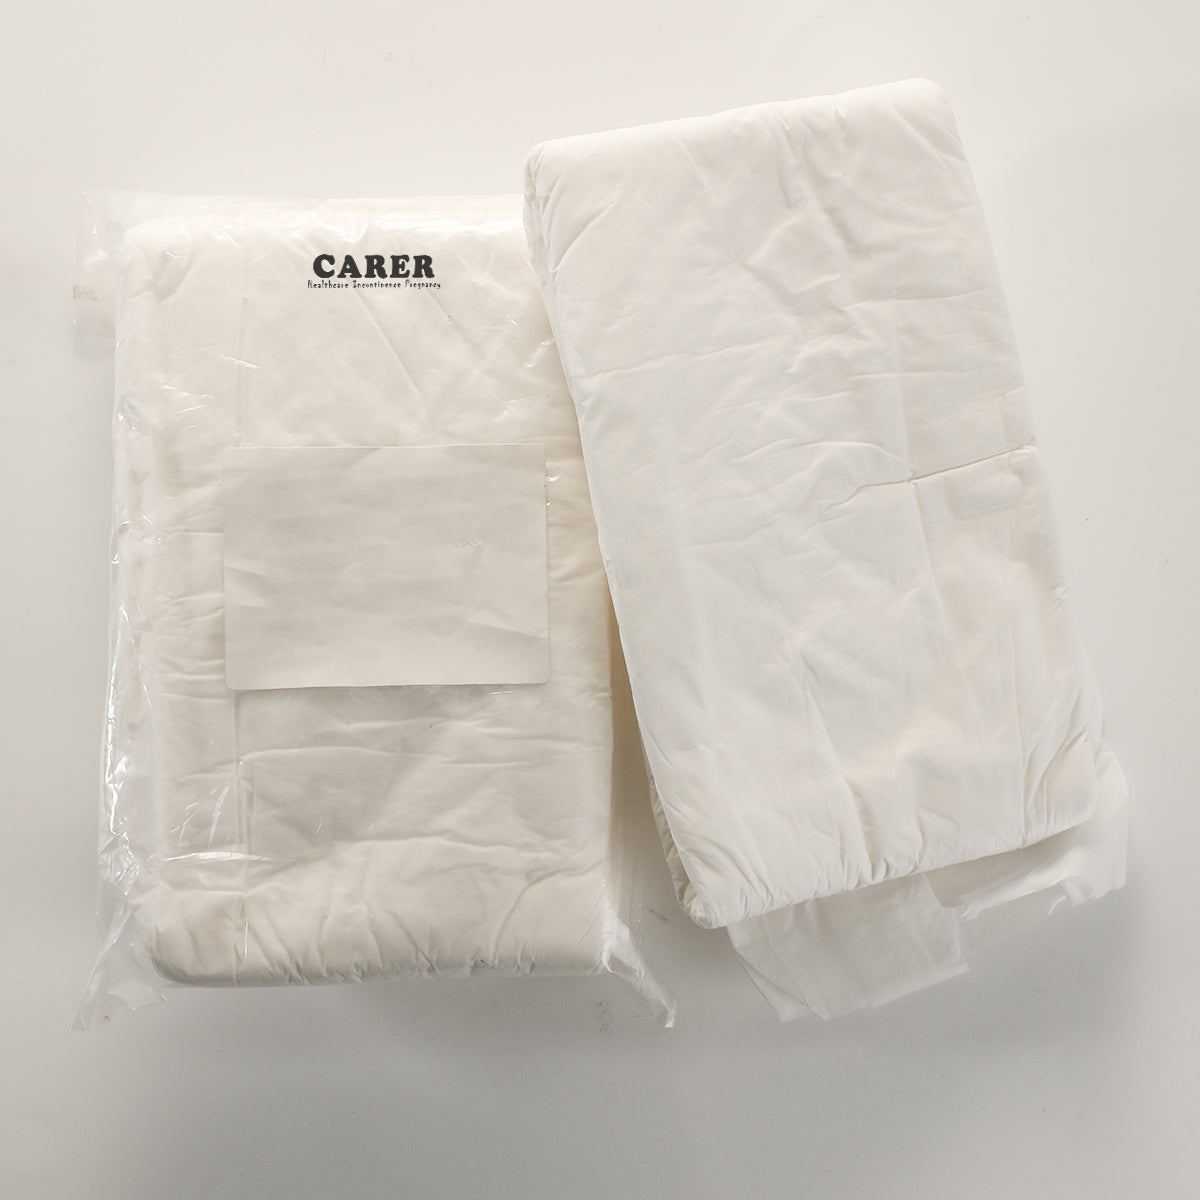 CARER Healthcare Incontinence Pregnancy Disposable Diapers for Incontinence Adult Diapers with Maximum Absorbency, Disposable Incontinence Briefs for Men and Women Overnight Absorbency Leak Protection